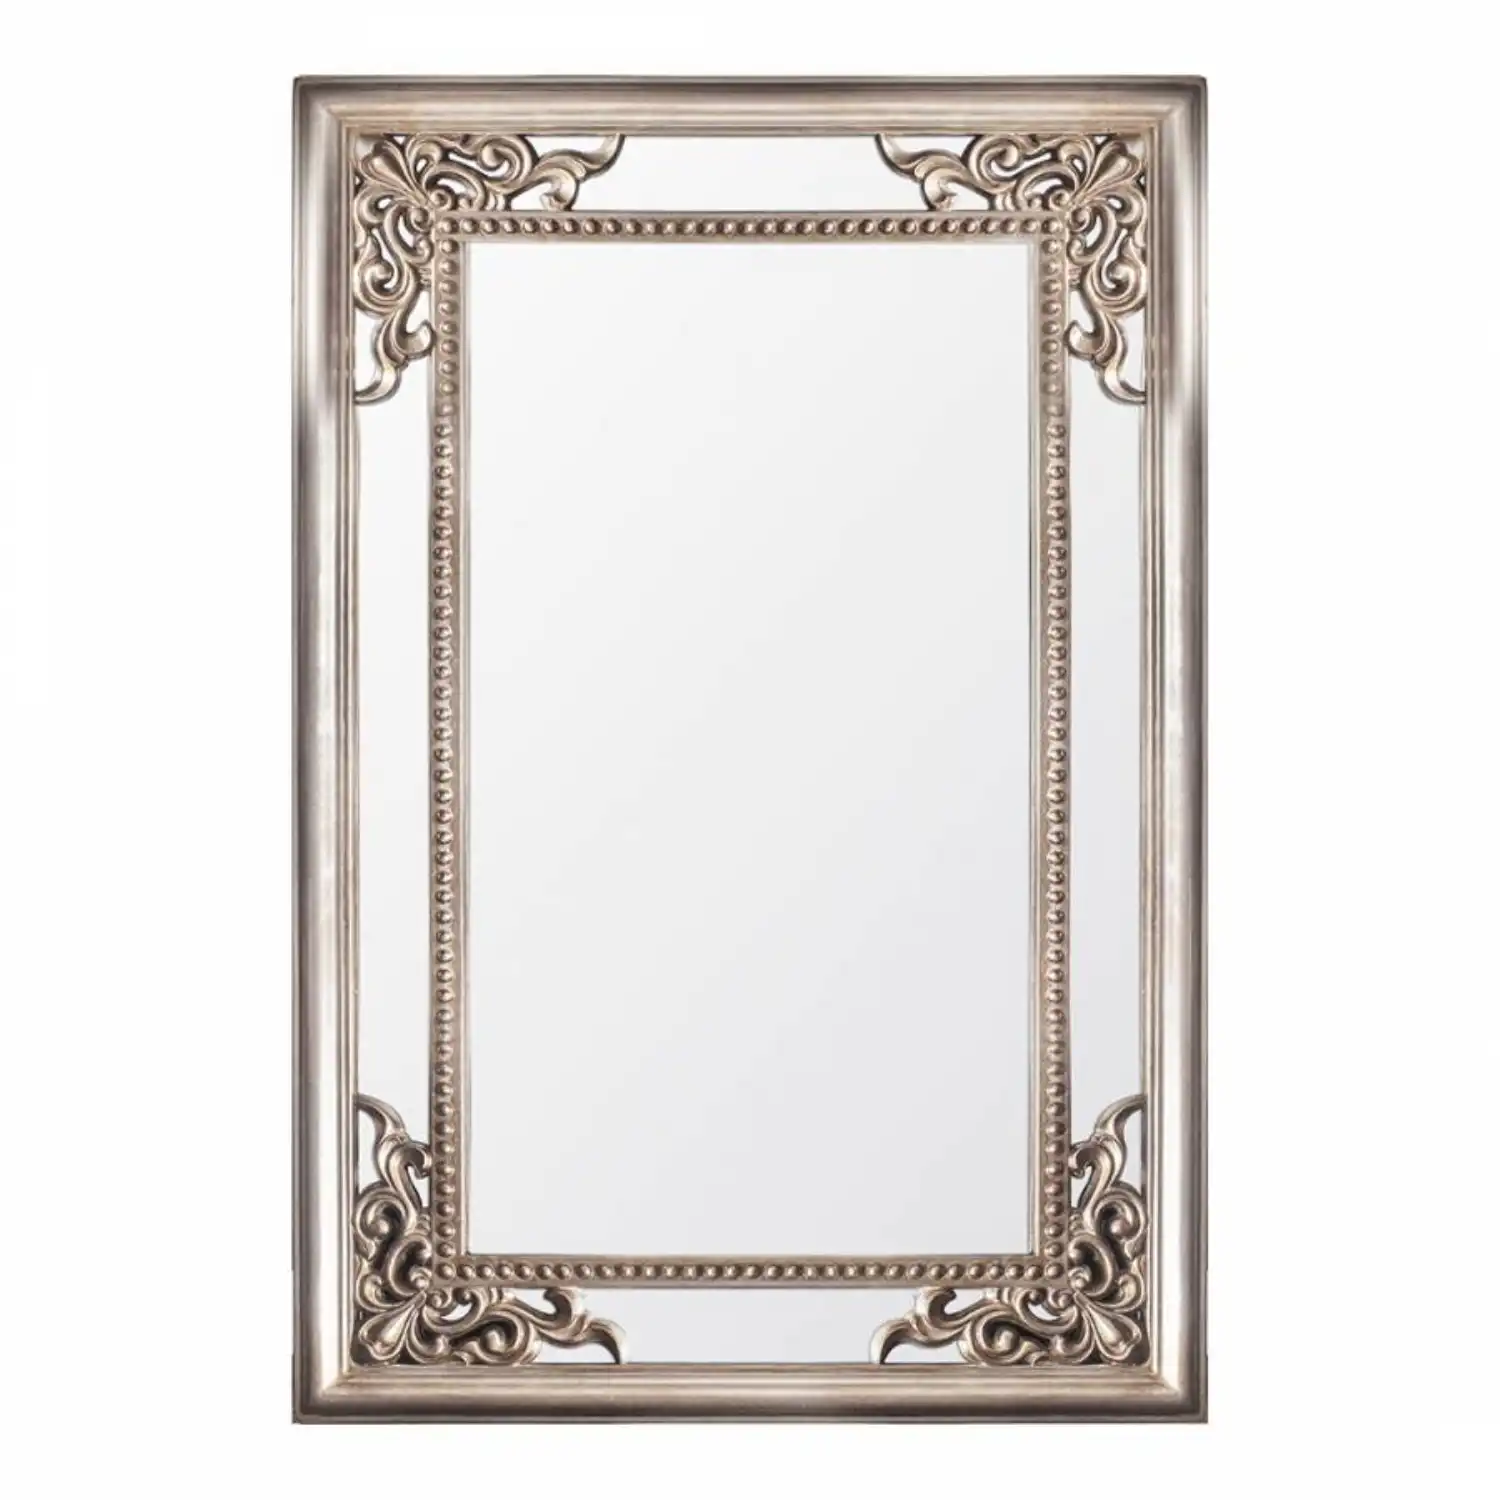 Traditional Ornate Champagne Silver Rectangular Bevelled Large Wall Mirror